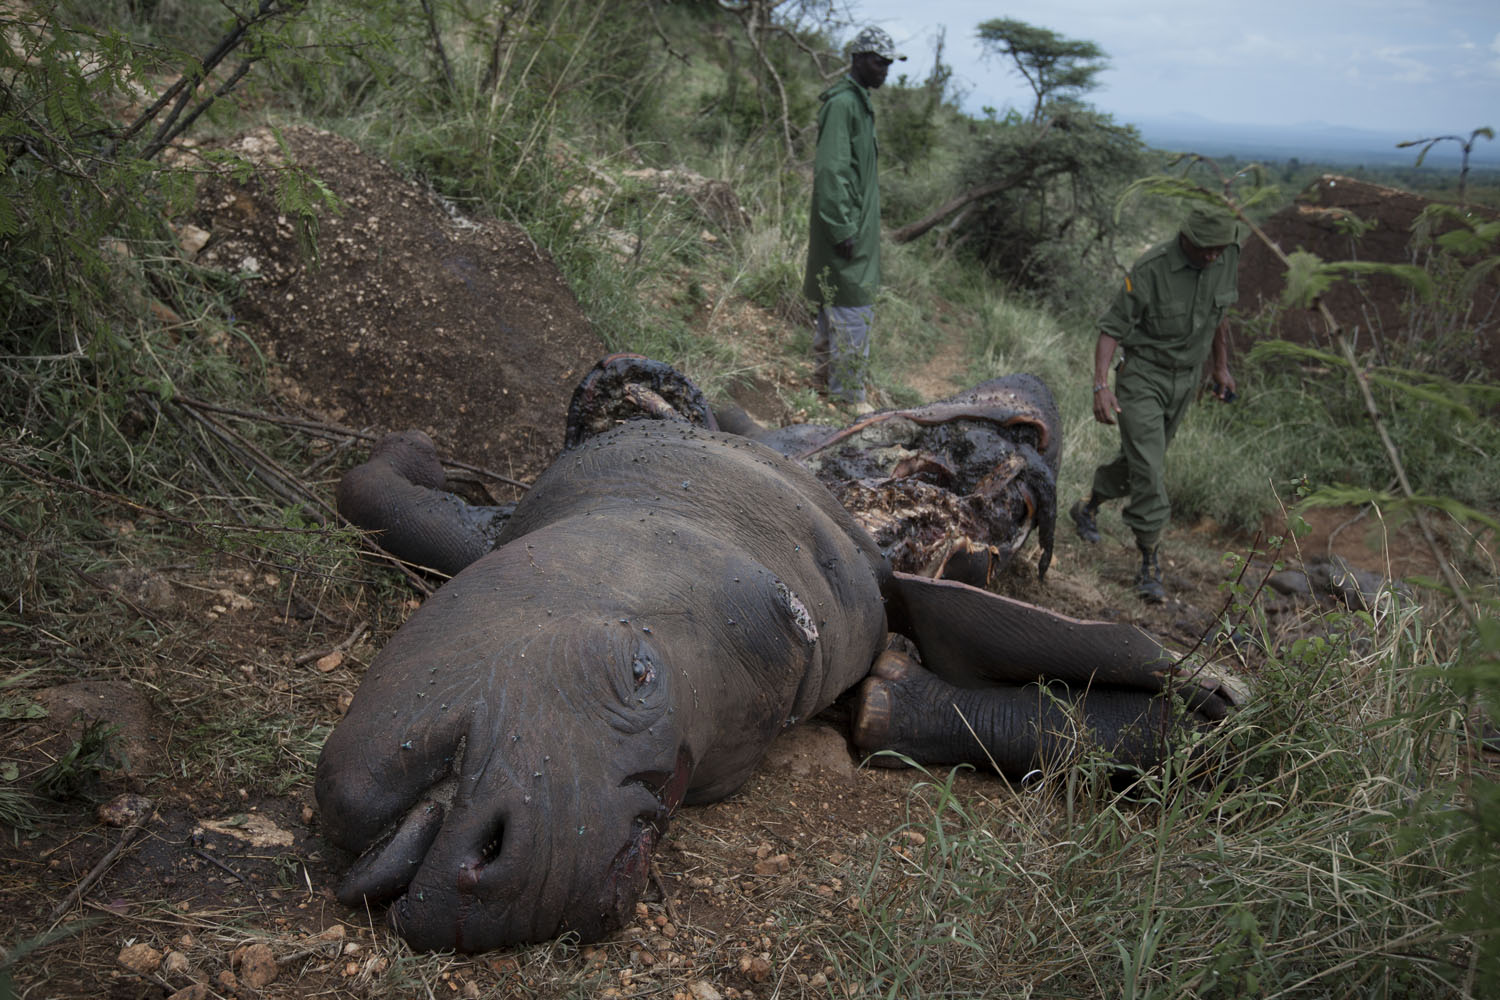 Poaching and wildlife conservation in Kenya